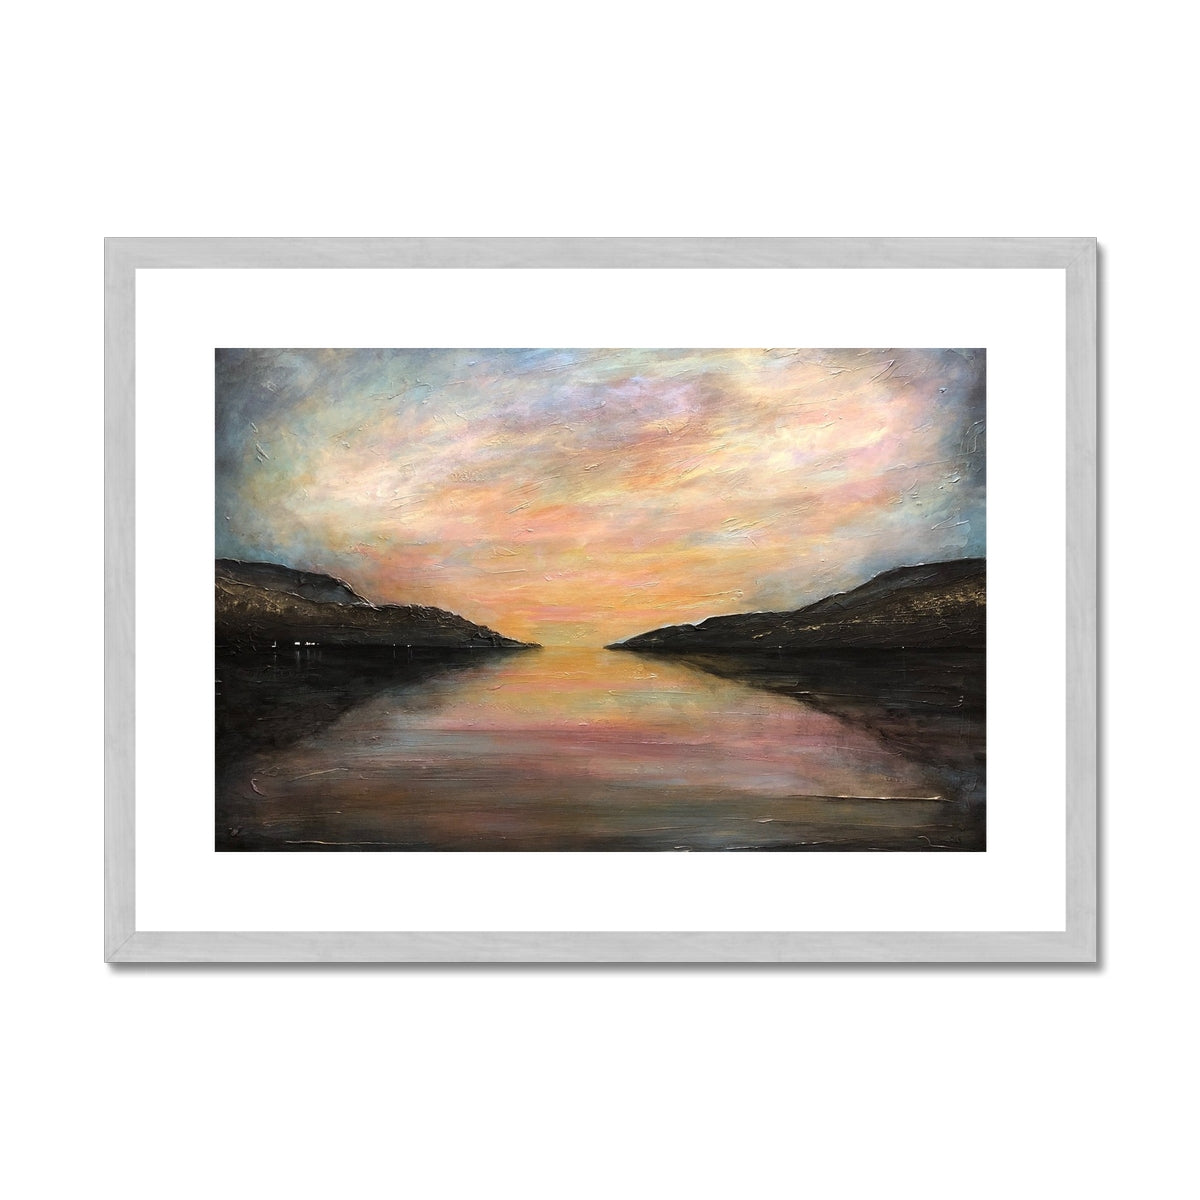 Loch Ness Glow Painting | Antique Framed & Mounted Prints From Scotland-Antique Framed & Mounted Prints-Scottish Lochs & Mountains Art Gallery-A2 Landscape-Silver Frame-Paintings, Prints, Homeware, Art Gifts From Scotland By Scottish Artist Kevin Hunter